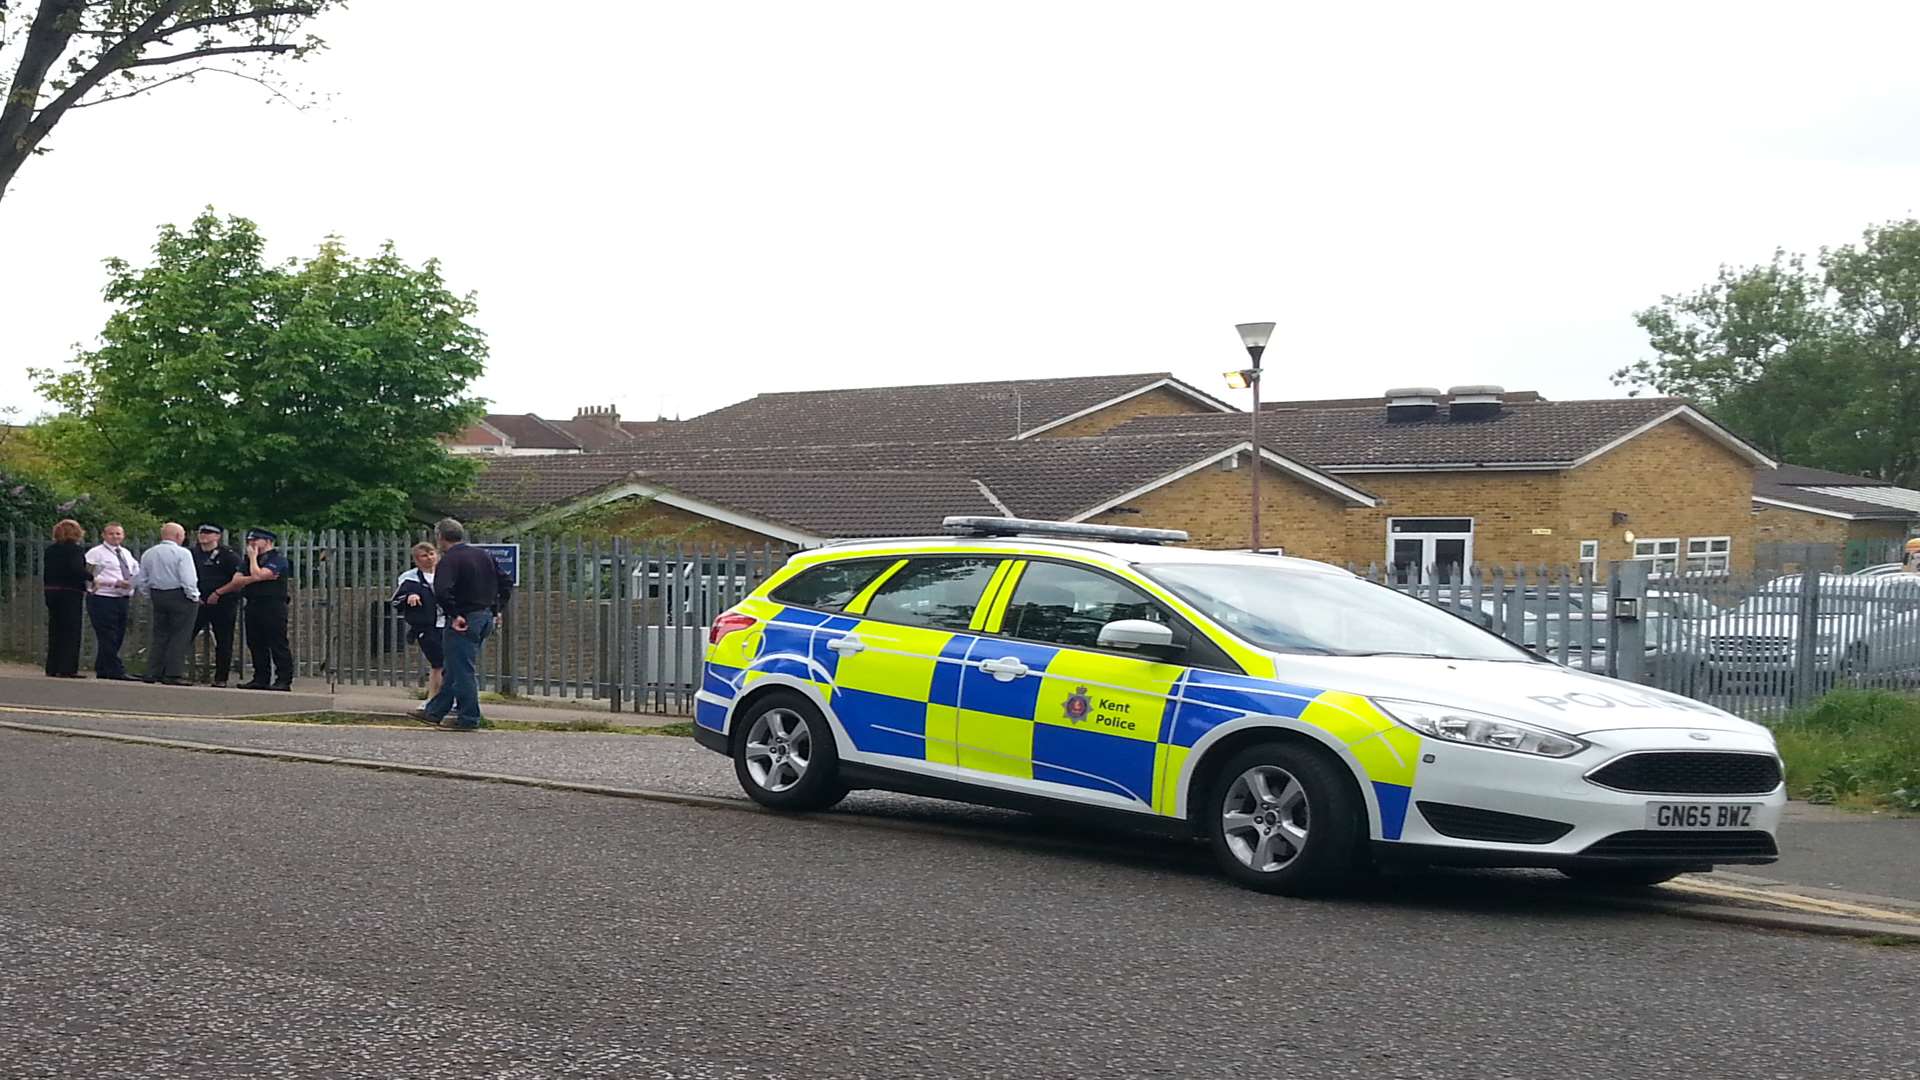 Police at Trinity school after a bomb was found